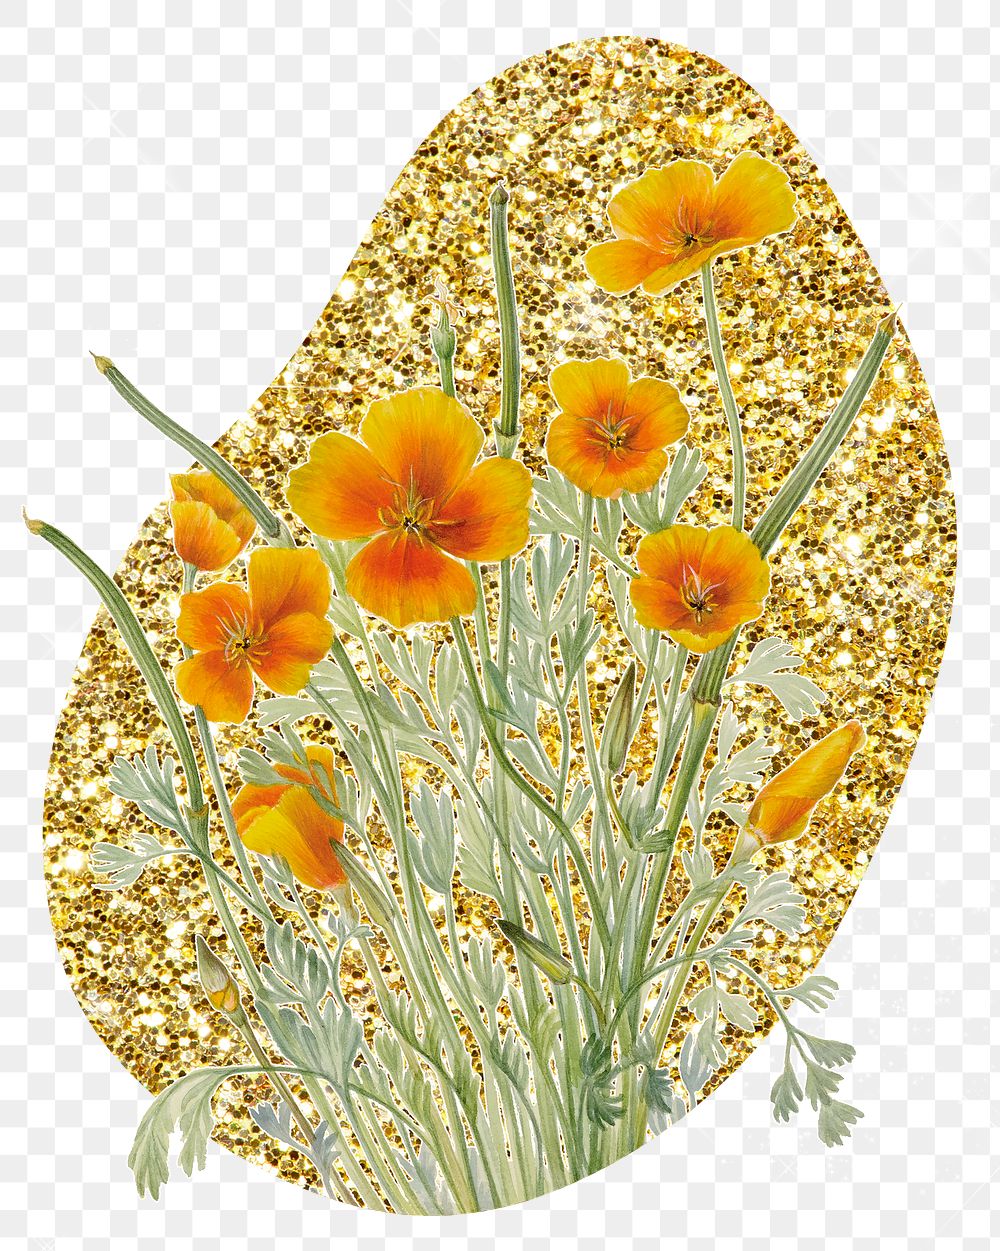 Png yellow Mexican poppy flower badge sticker, gold glitter blob shape, transparent background